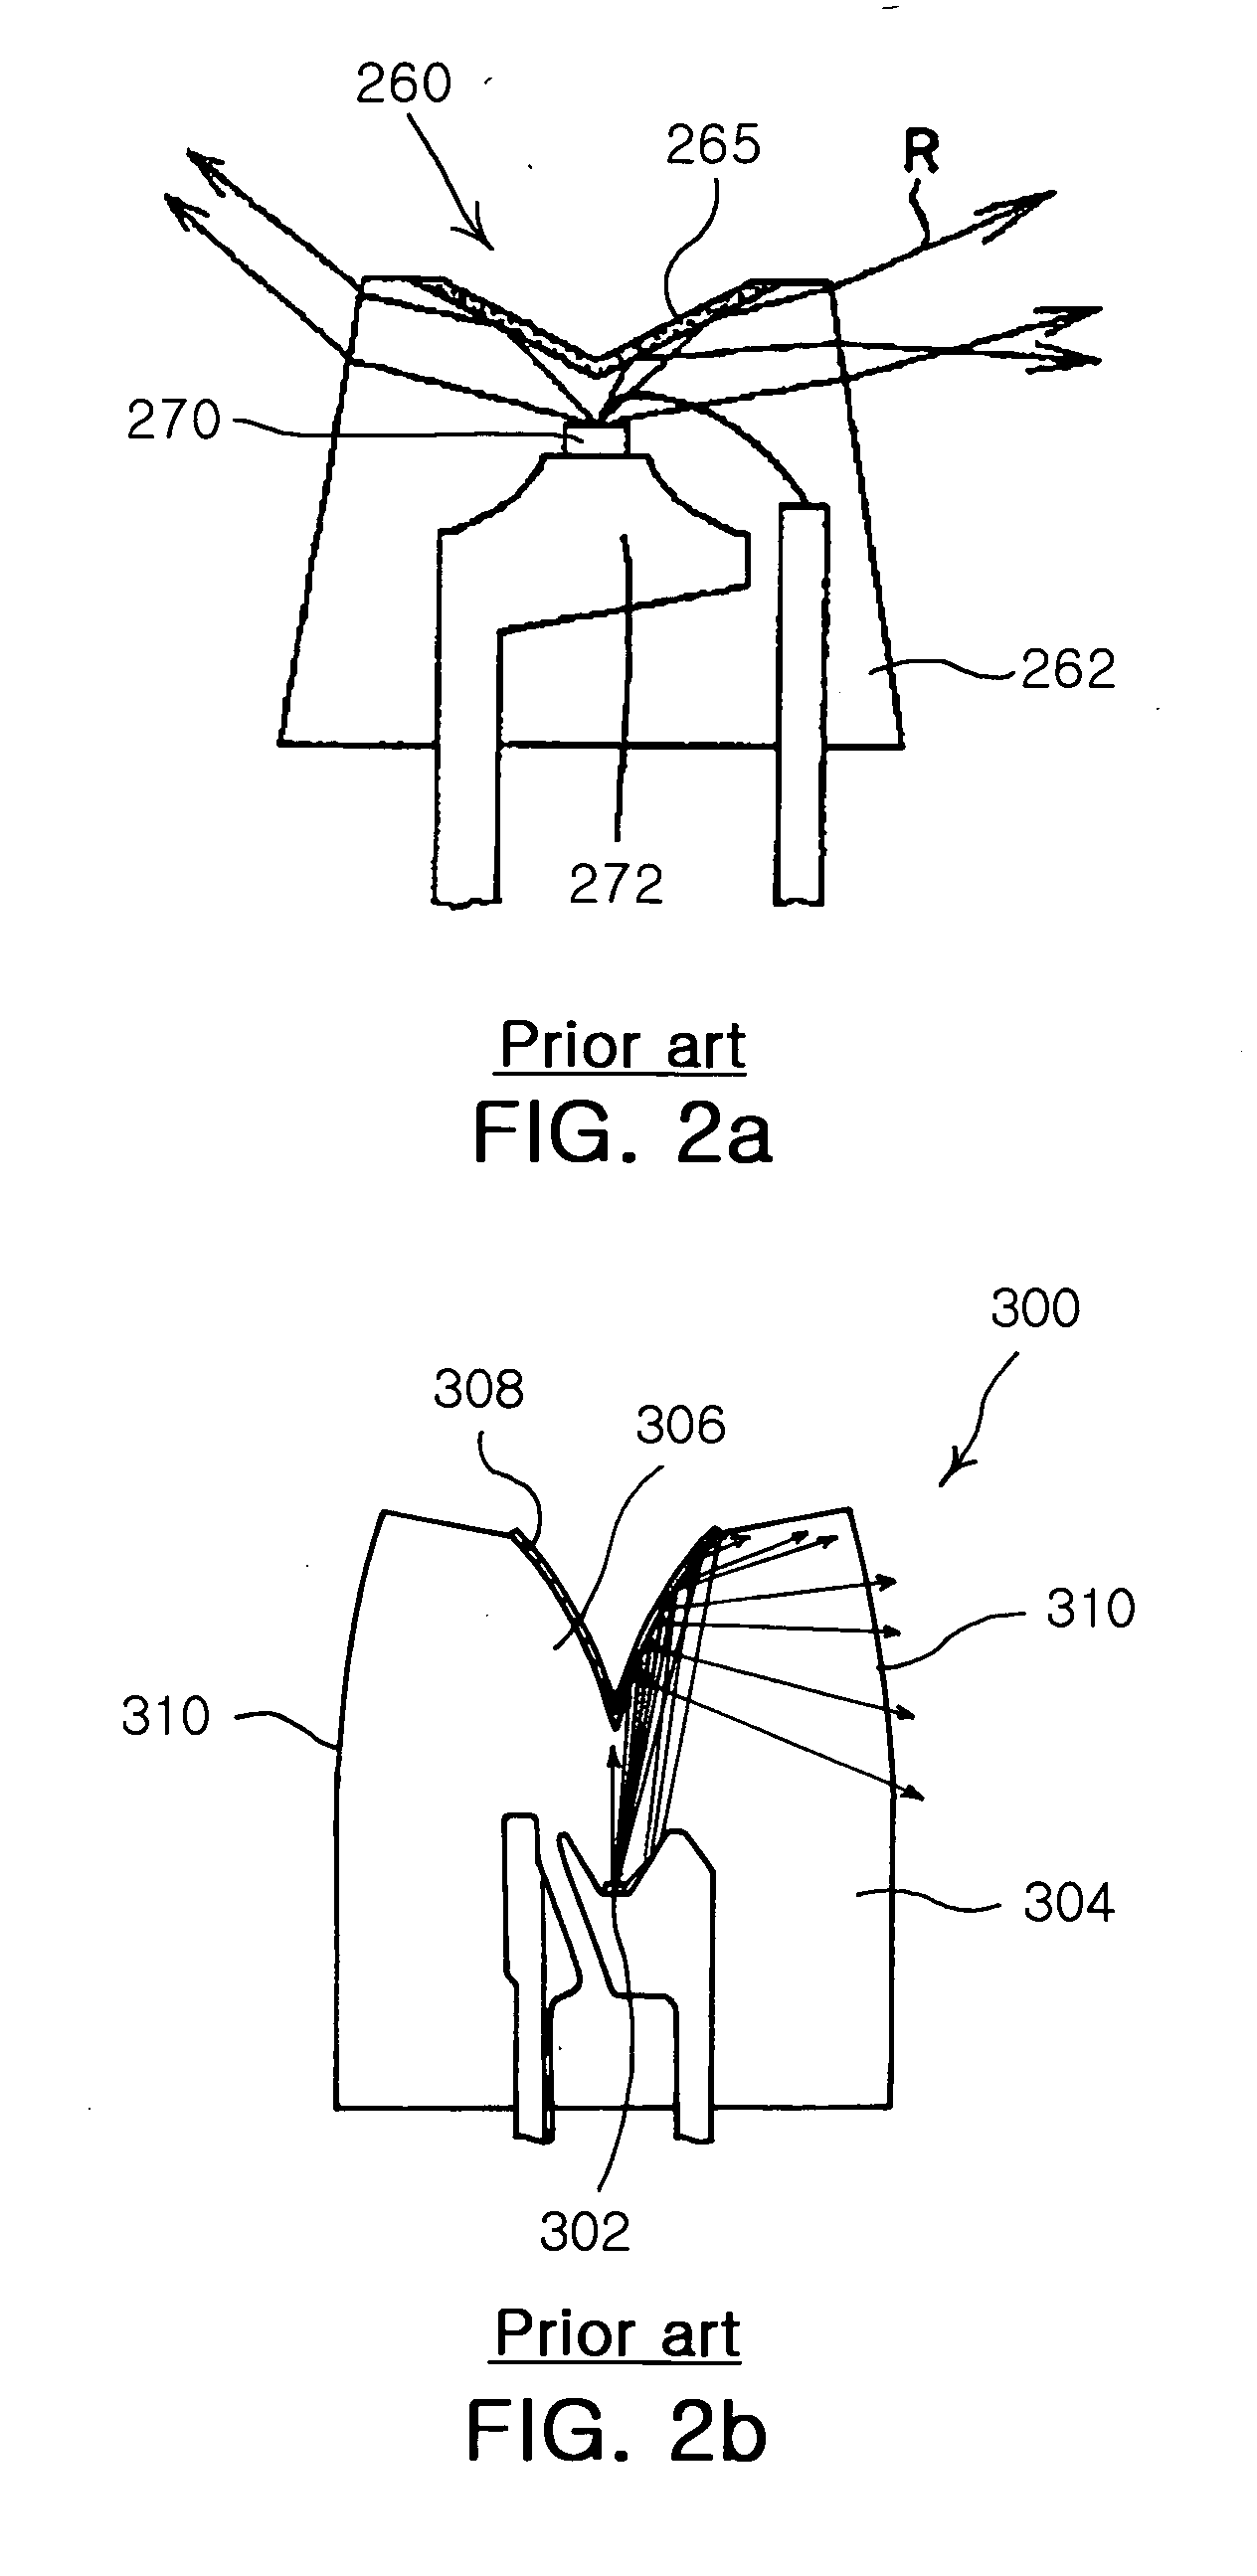 Side-emitting LED package and method of manufacturing the same